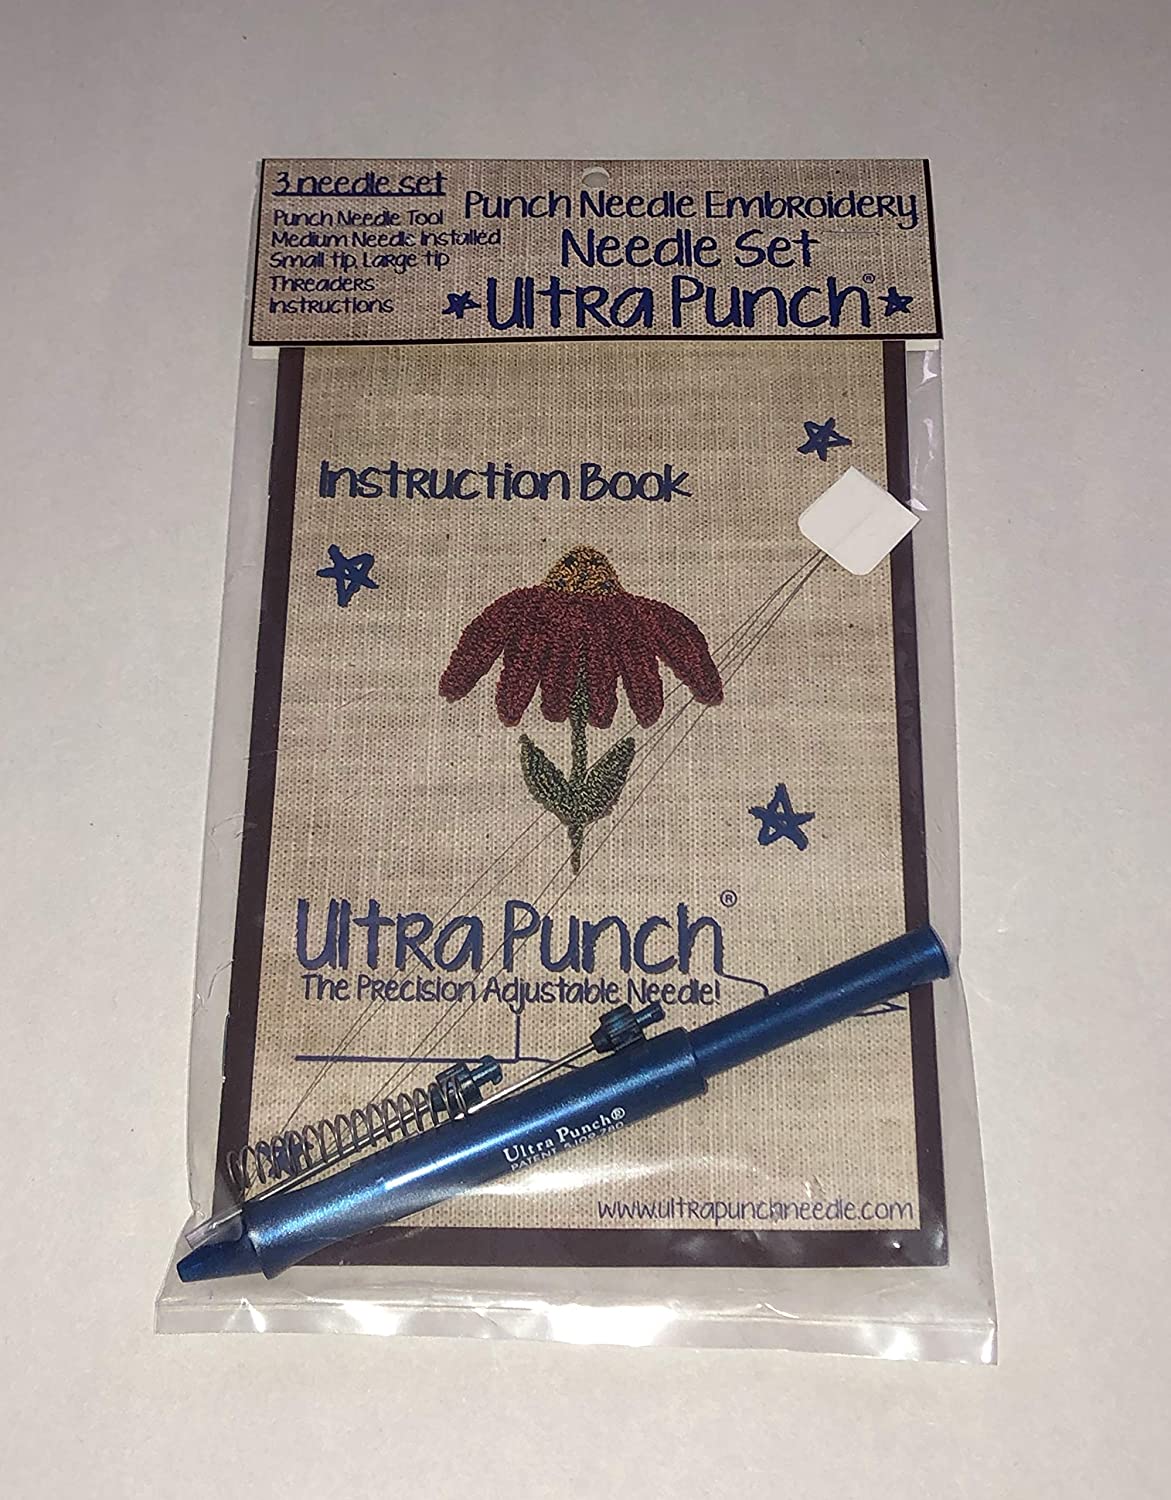  Punch Needle Tool Ultra Punch Needle Steel Embroidery Stitching  Punch Needles Set Knitting Art Needles with Handle : Arts, Crafts & Sewing